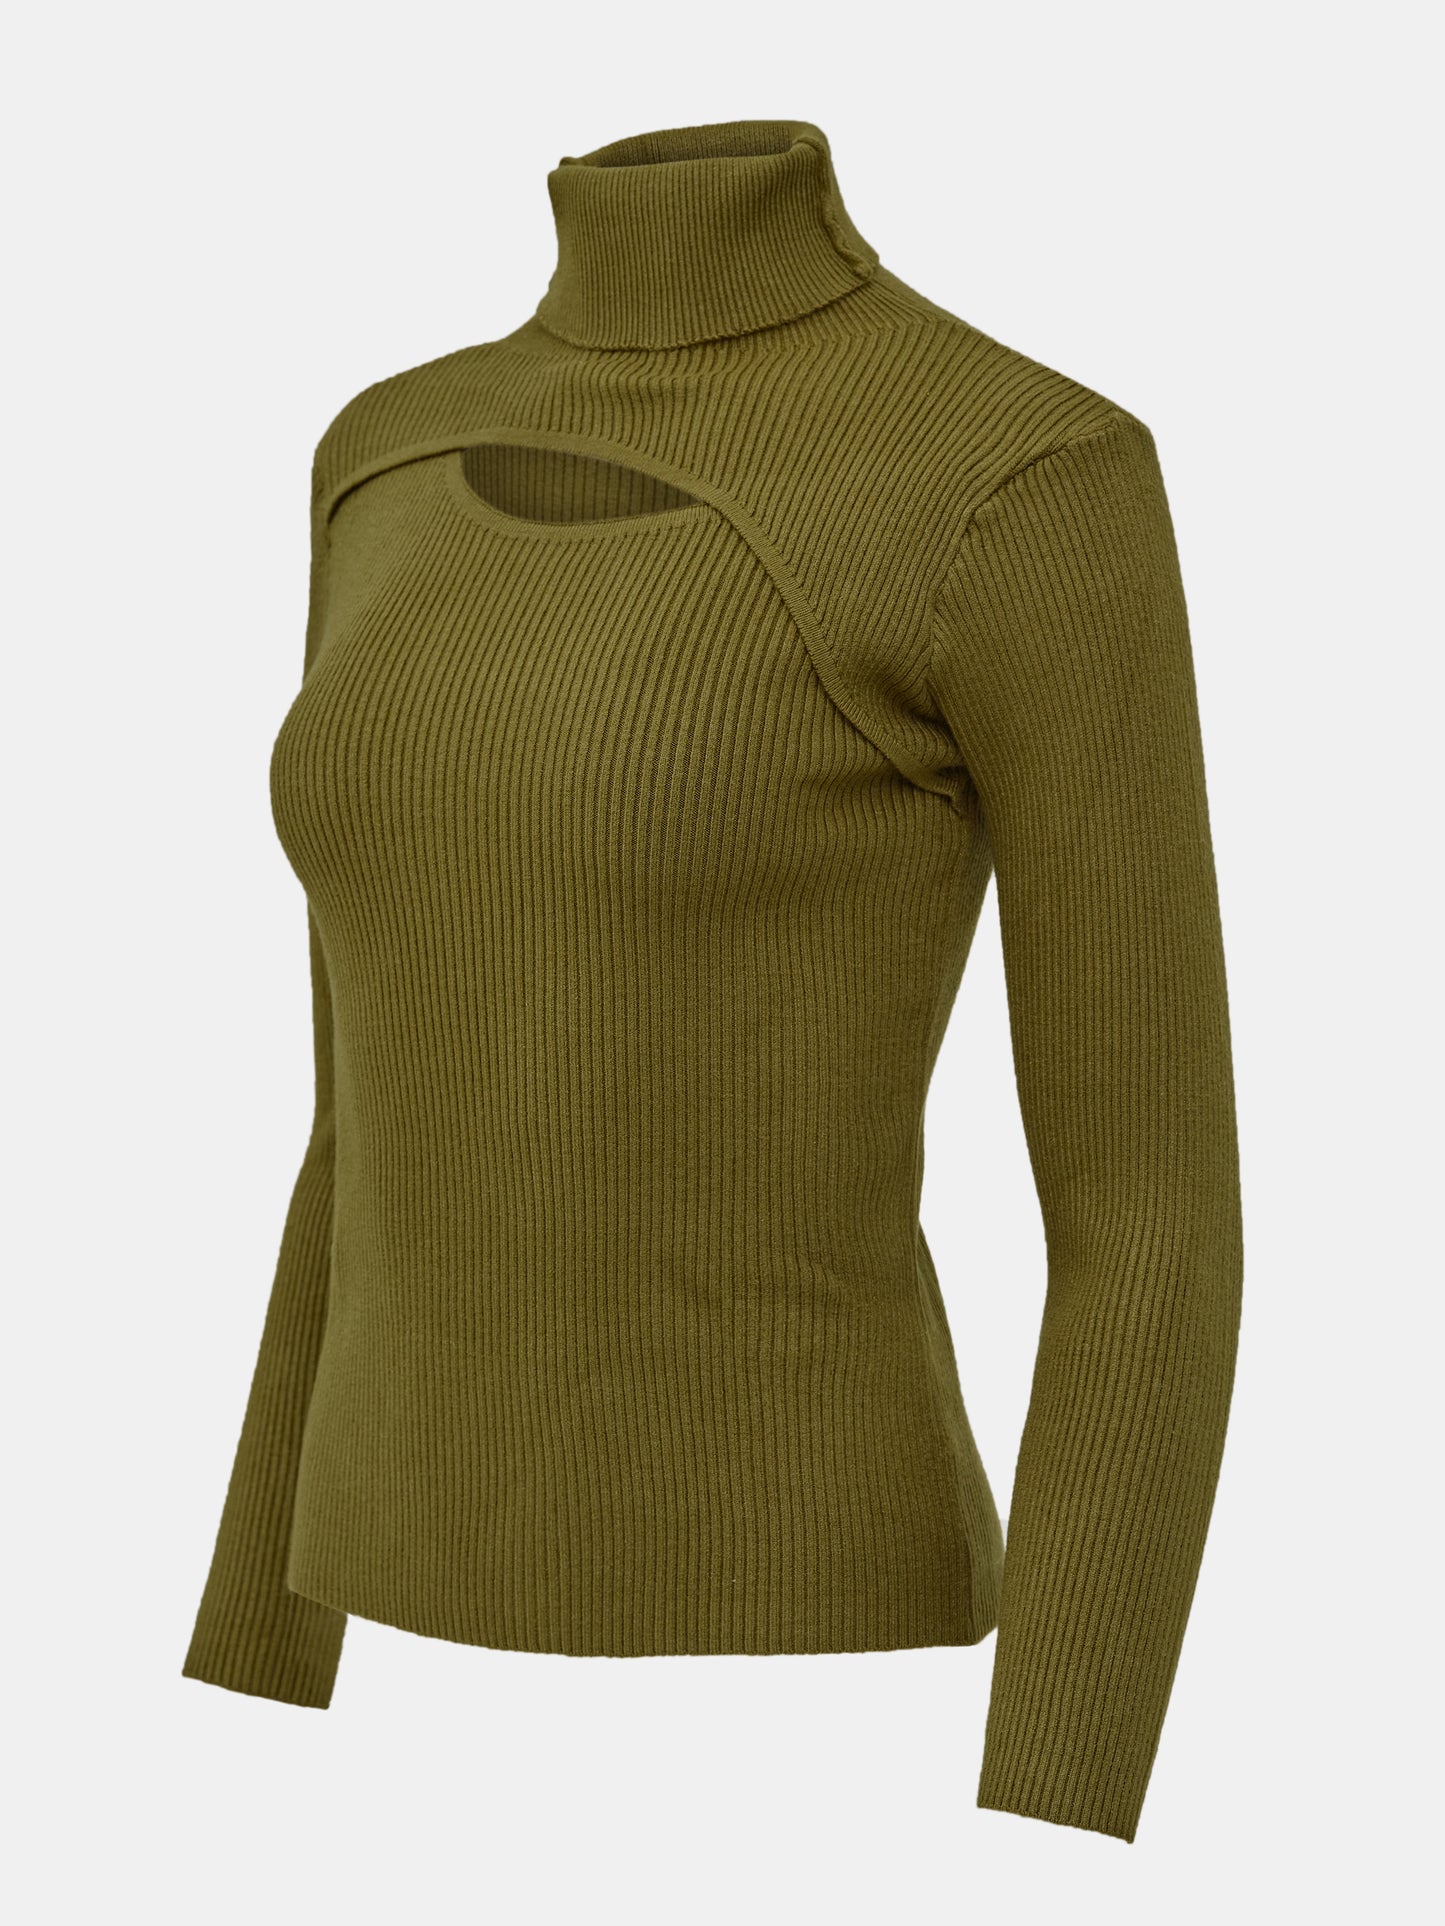 Cut-Out Rib Turtleneck, Olive